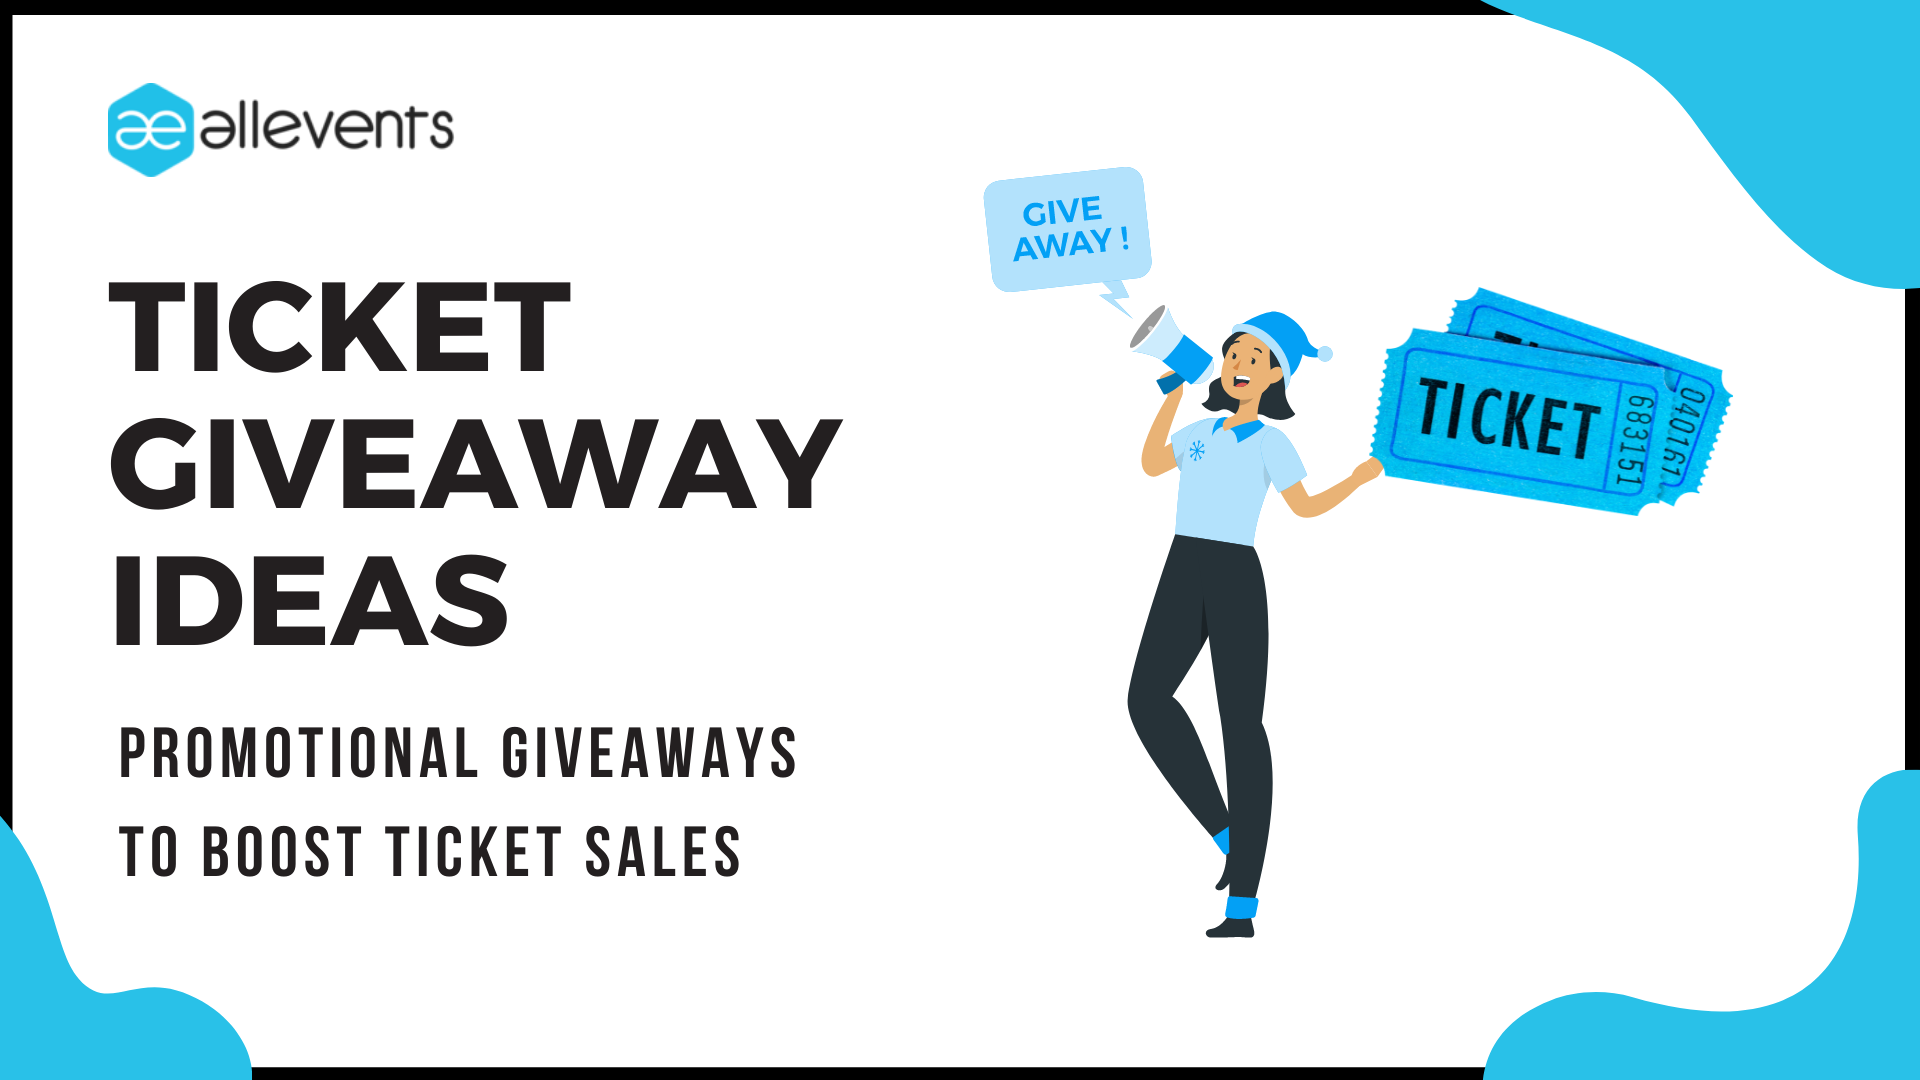 Ticket Giveaway Ideas- That can sell event tickets faster